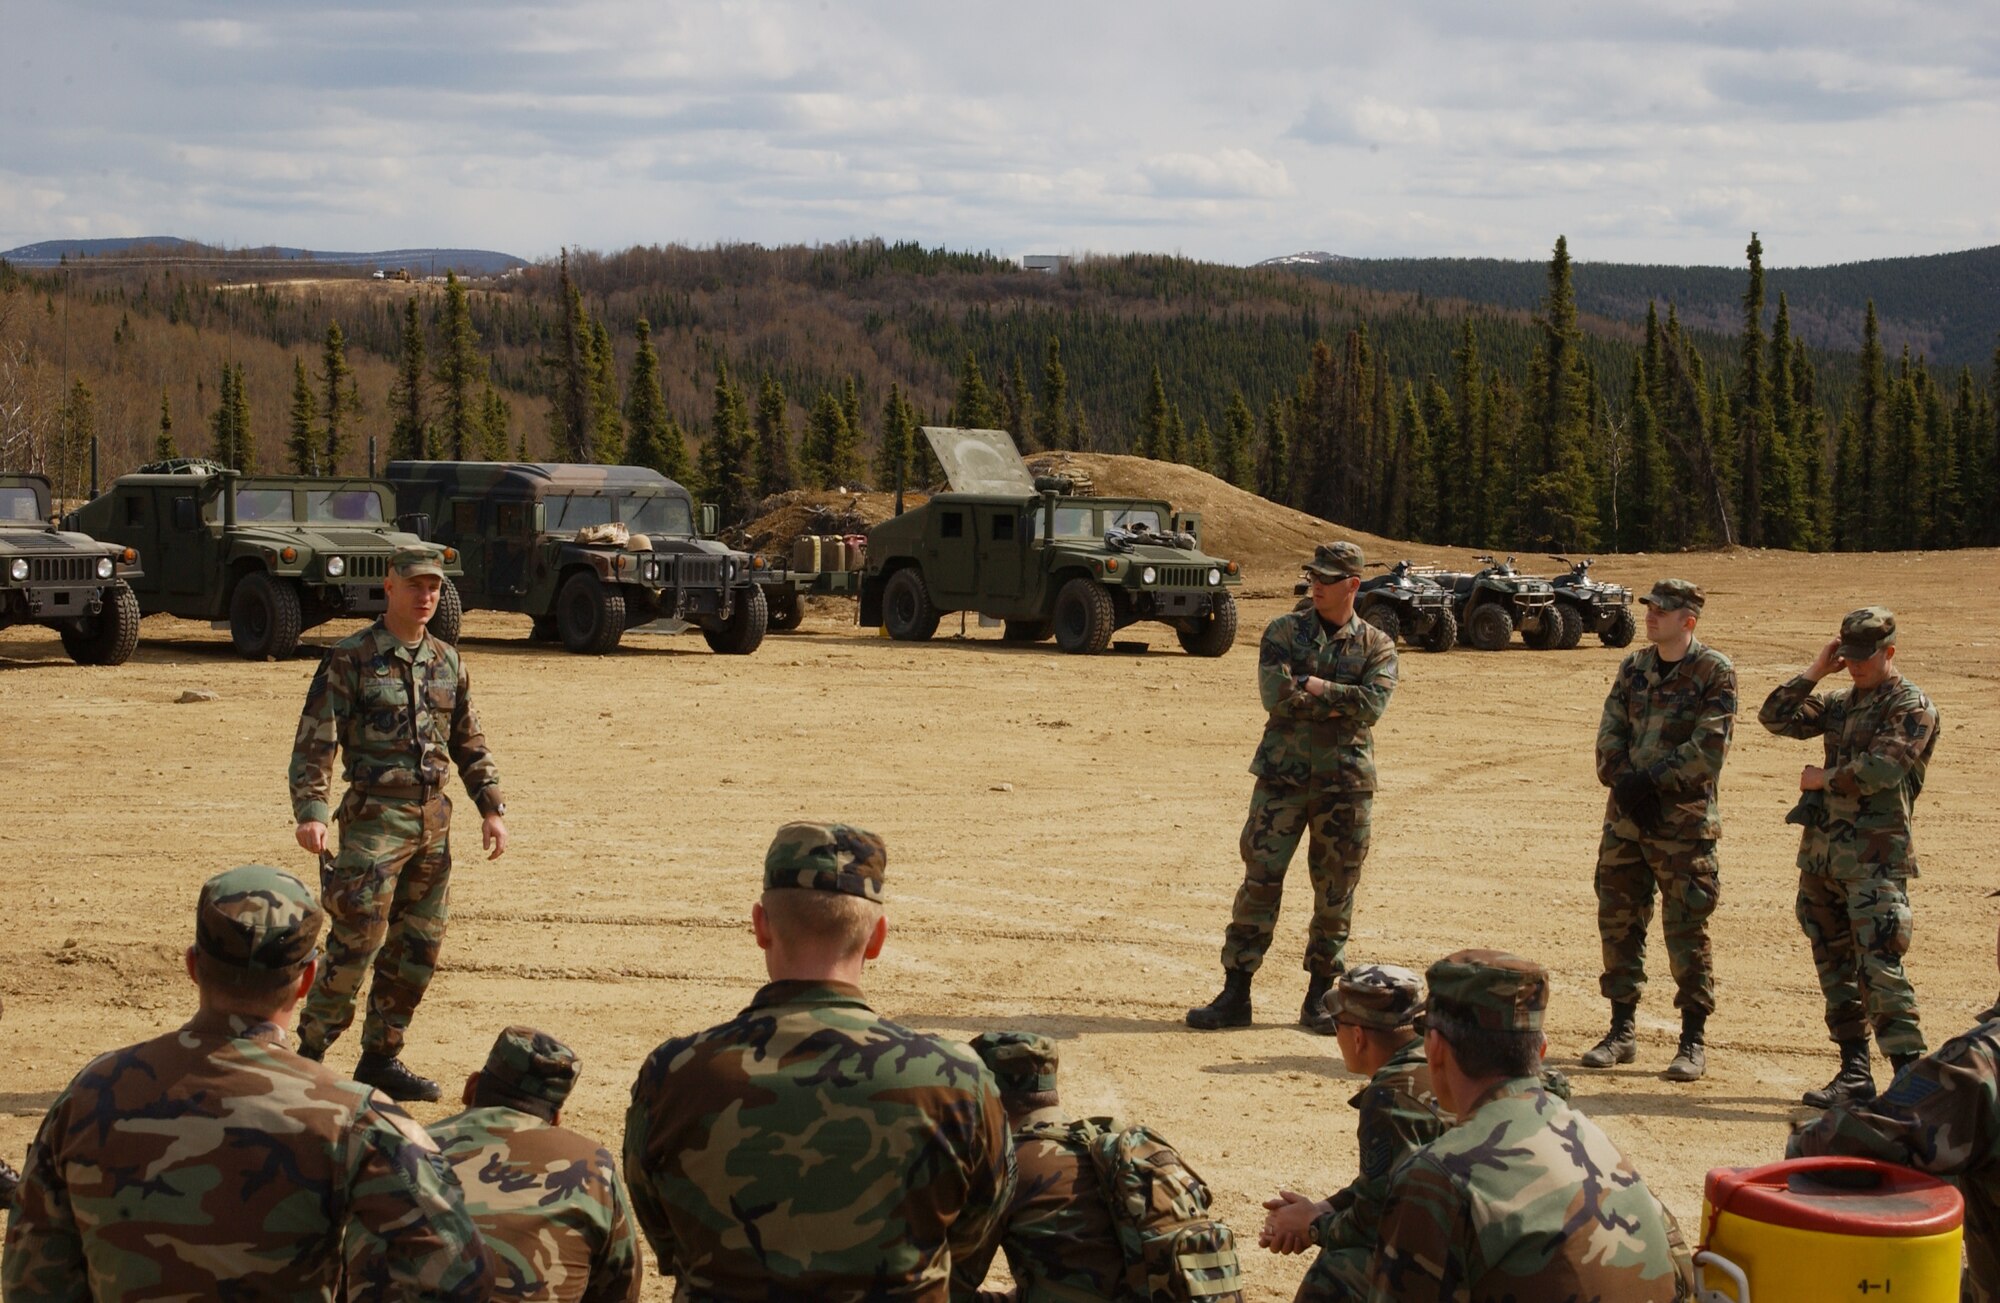 EIELSON AIR FORCE BASE, Alaska -- Tech. Sgt. Thomas Moody, 3rd Air Support Operations Squadron, briefs a class about combat techniques on Improvised Explosive Device Procedures, Defensive and Offensive Combat Procedures when dealing with a terrorist suspect on May 15 during Operation URSA Minor. ASOS members completed day one of a three-day field training exercise designed to prepare Airman with hands on combat training and experience before deploying to a combat area. (U.S. Air Force Photo by Airman 1st Class Jonathan Snyder) 